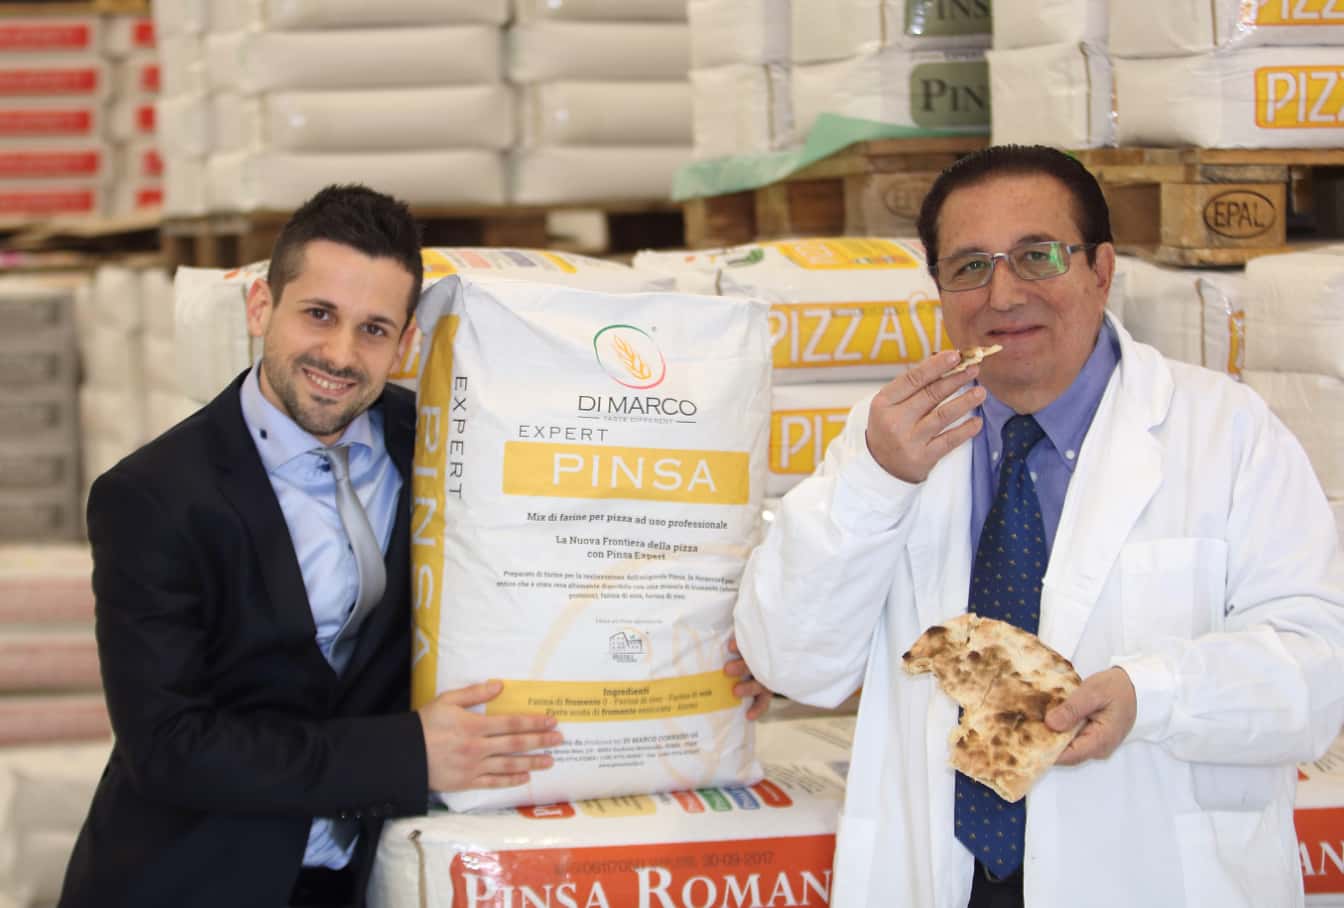 Photo of Corrado Di Marco tasting a Pinsa dough and another staff member with sacks of flour behind them.